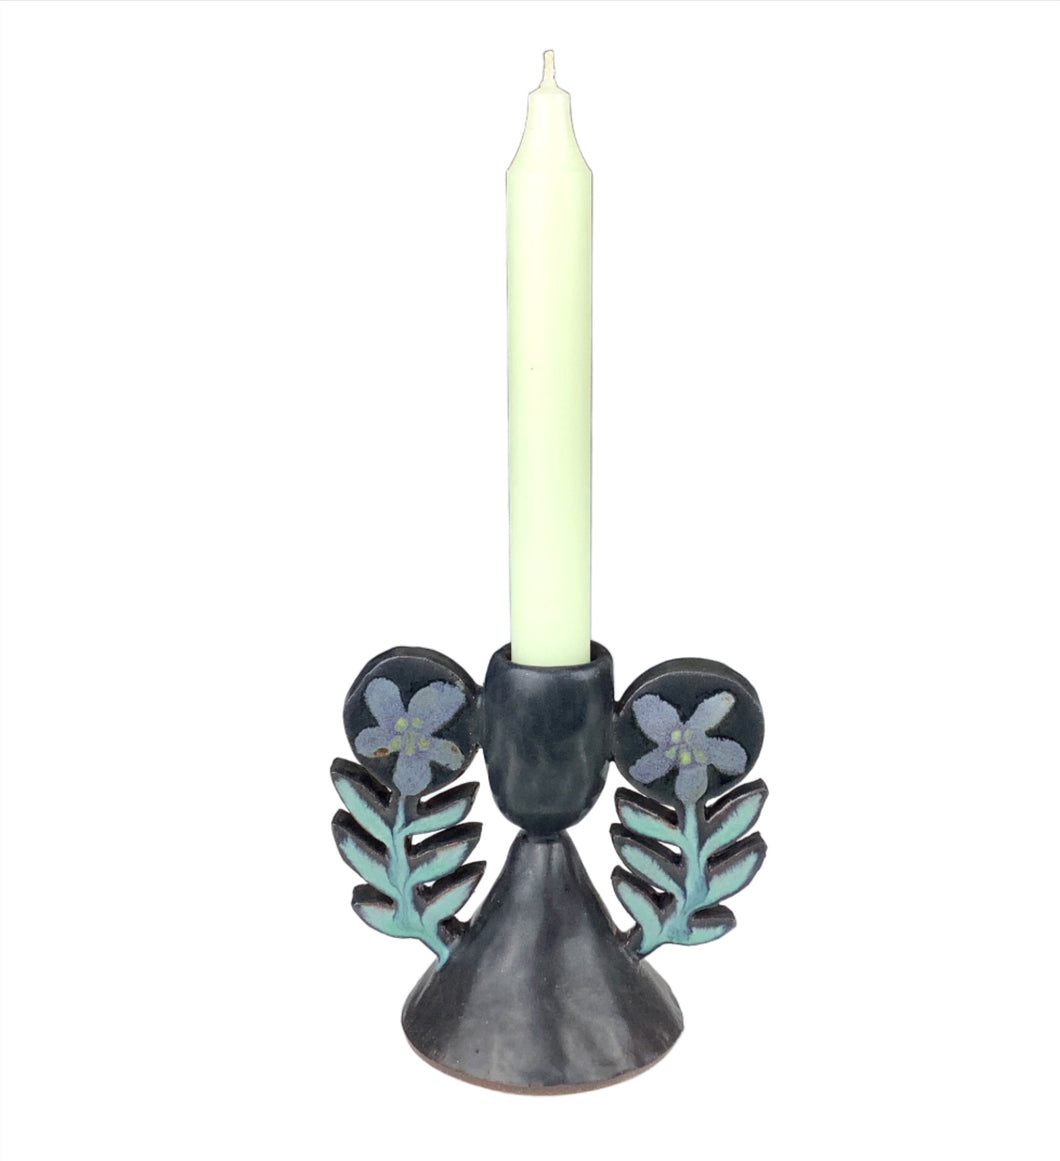 Ruth Easterbrook- Winged Candlestick Holder #3